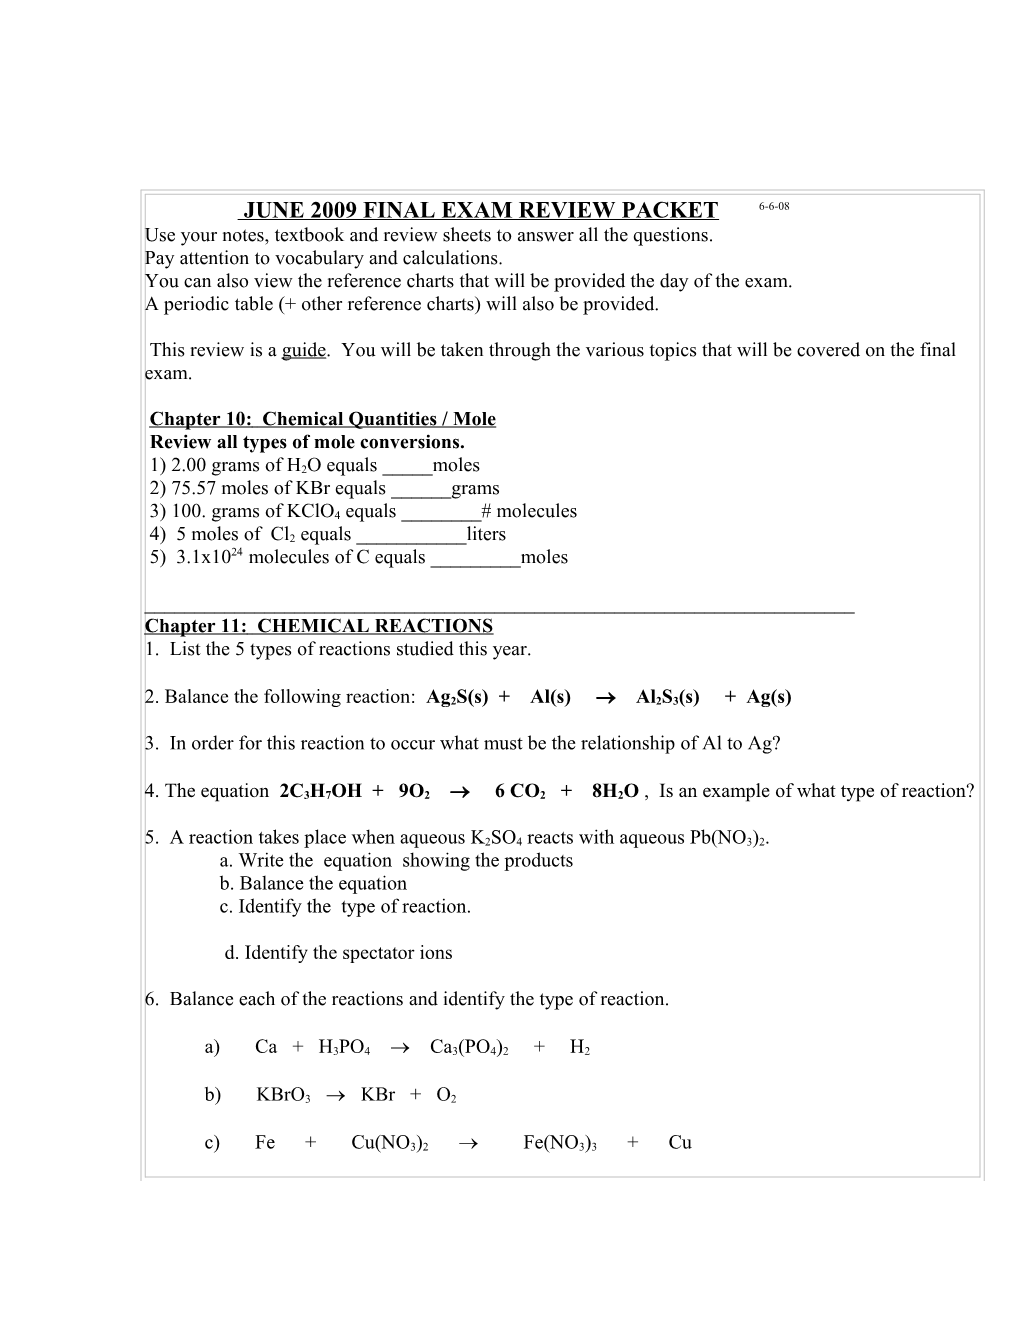 JUNE 2007 FINAL EXAM REVIEW PACKET 6-5-07 Revision